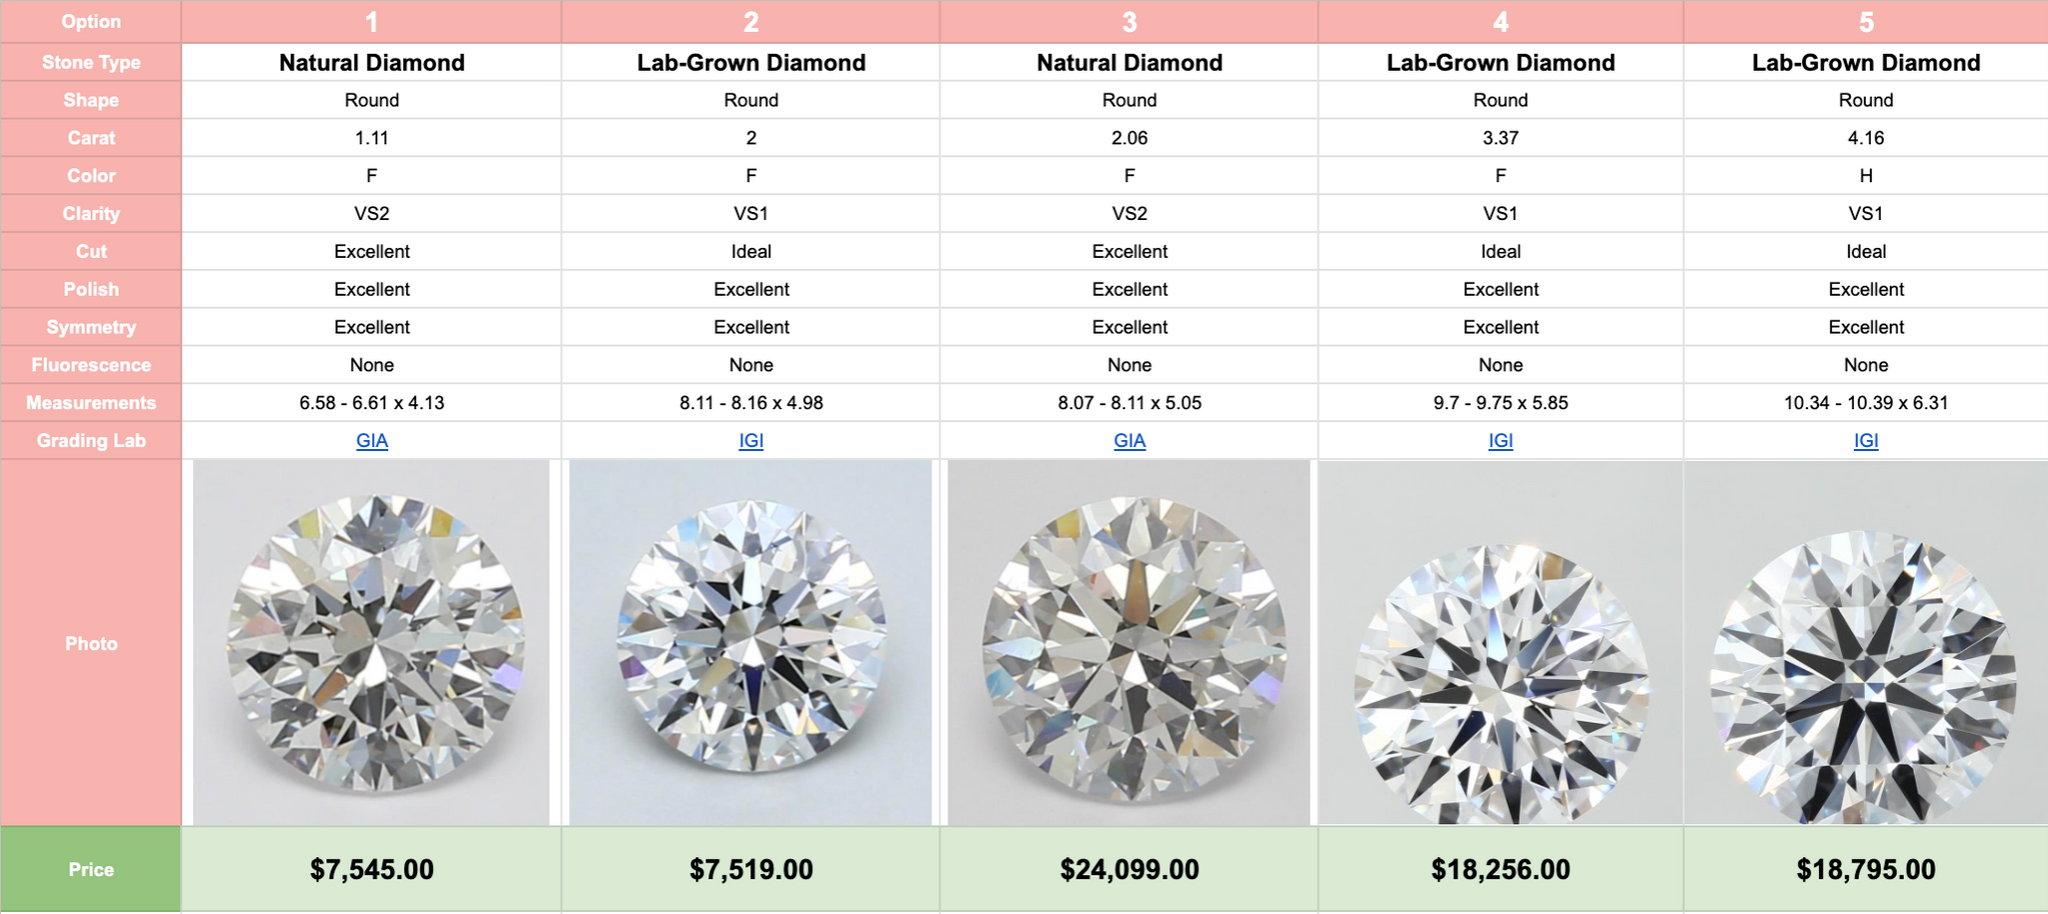 This or that? How lab-grown and natural diamonds differ